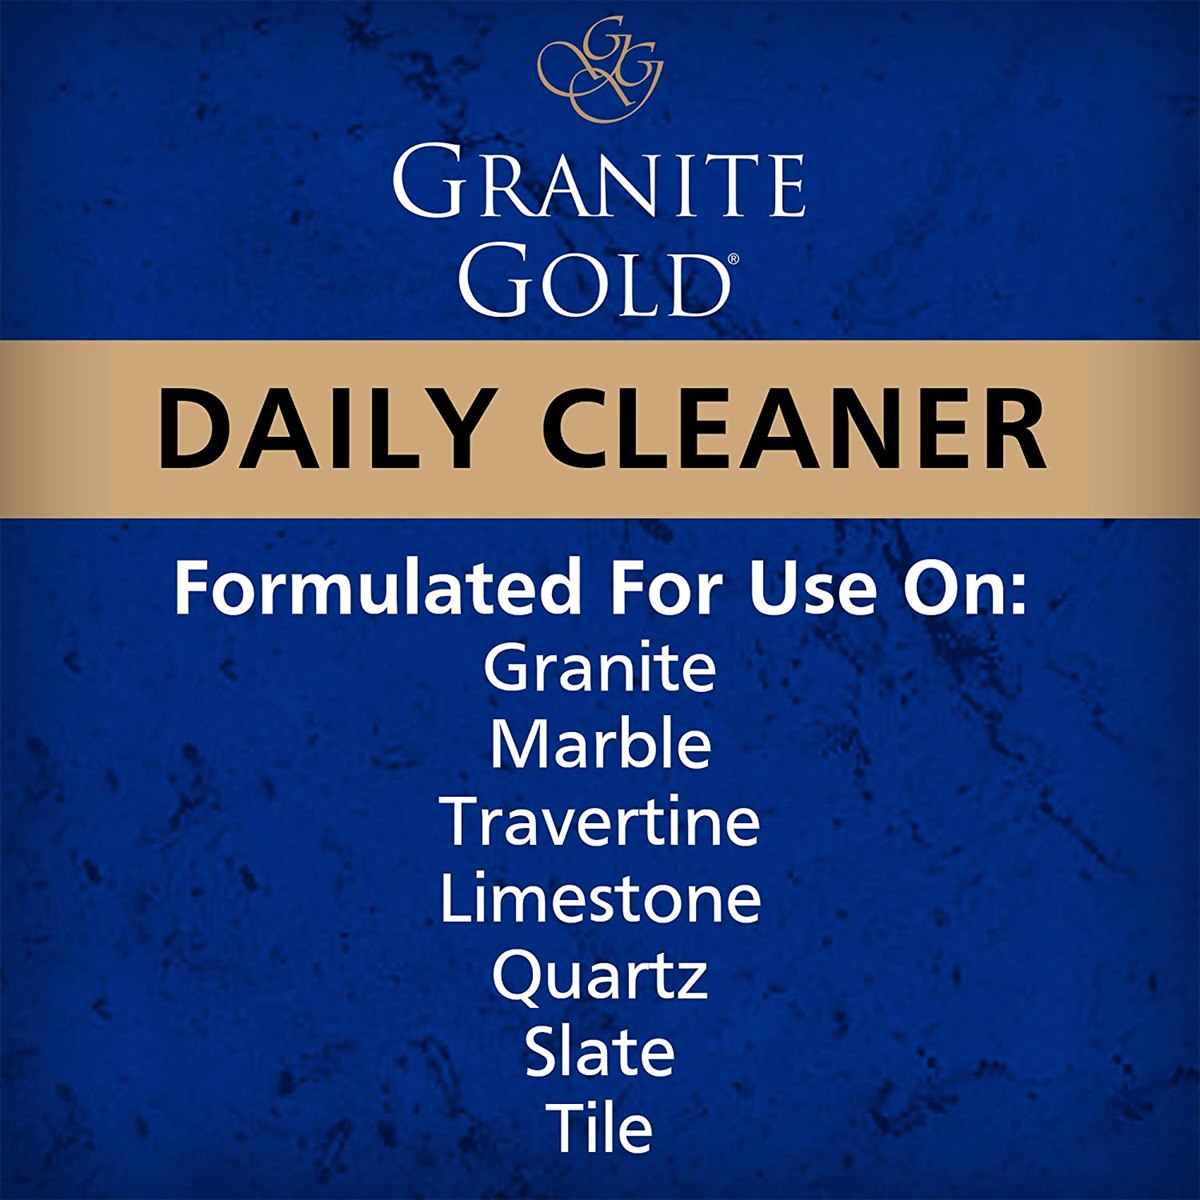 Where to Use Granite Gold Daily Cleaner Spray